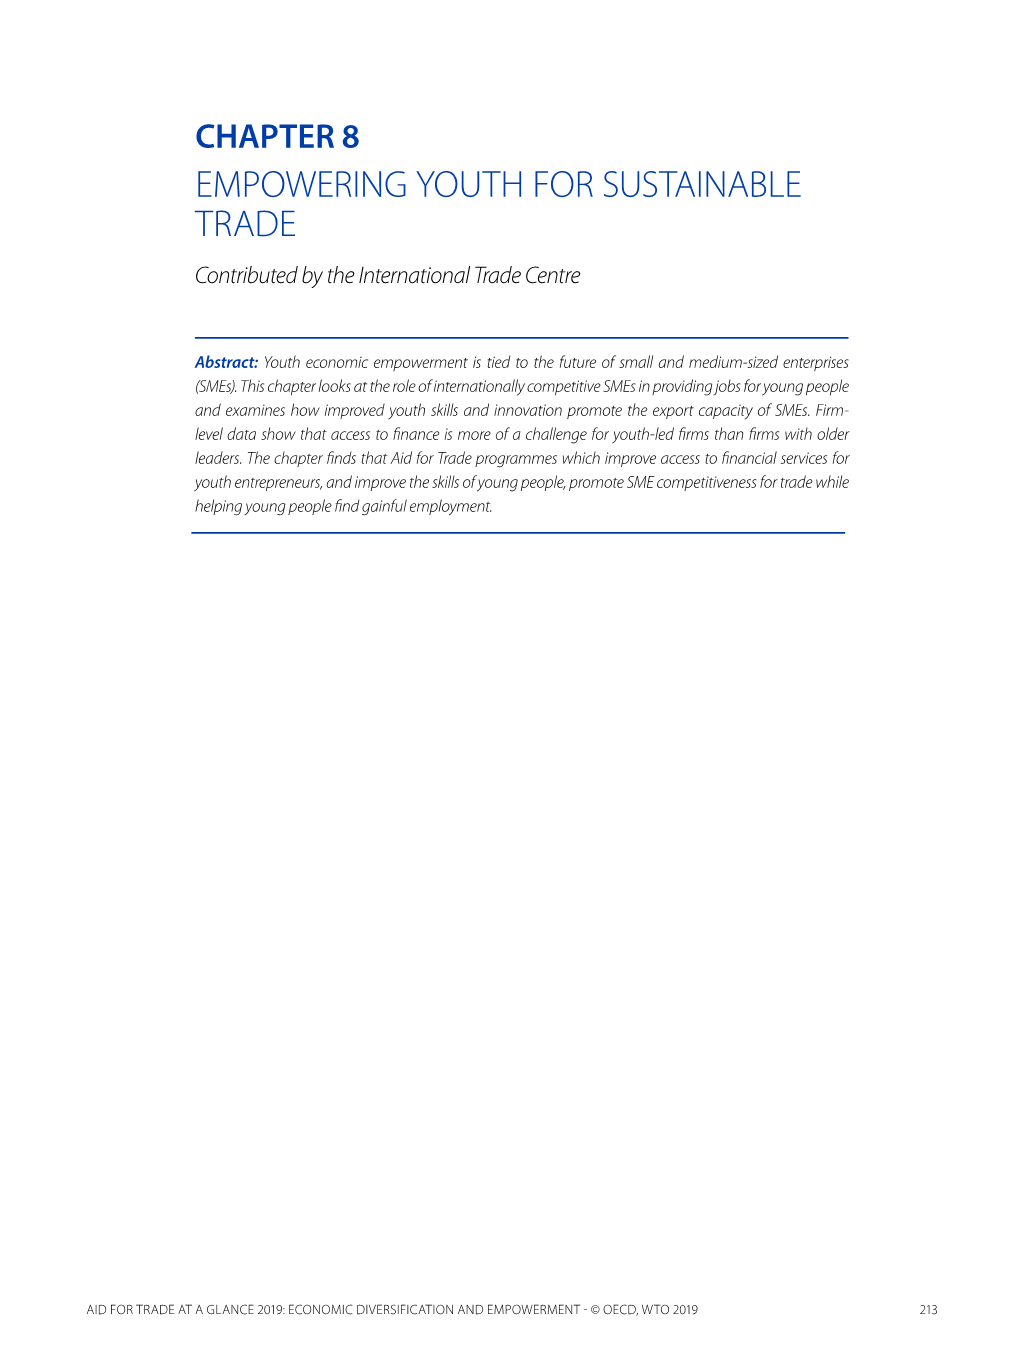 CHAPTER 8 EMPOWERING YOUTH for SUSTAINABLE TRADE Contributed by the International Trade Centre